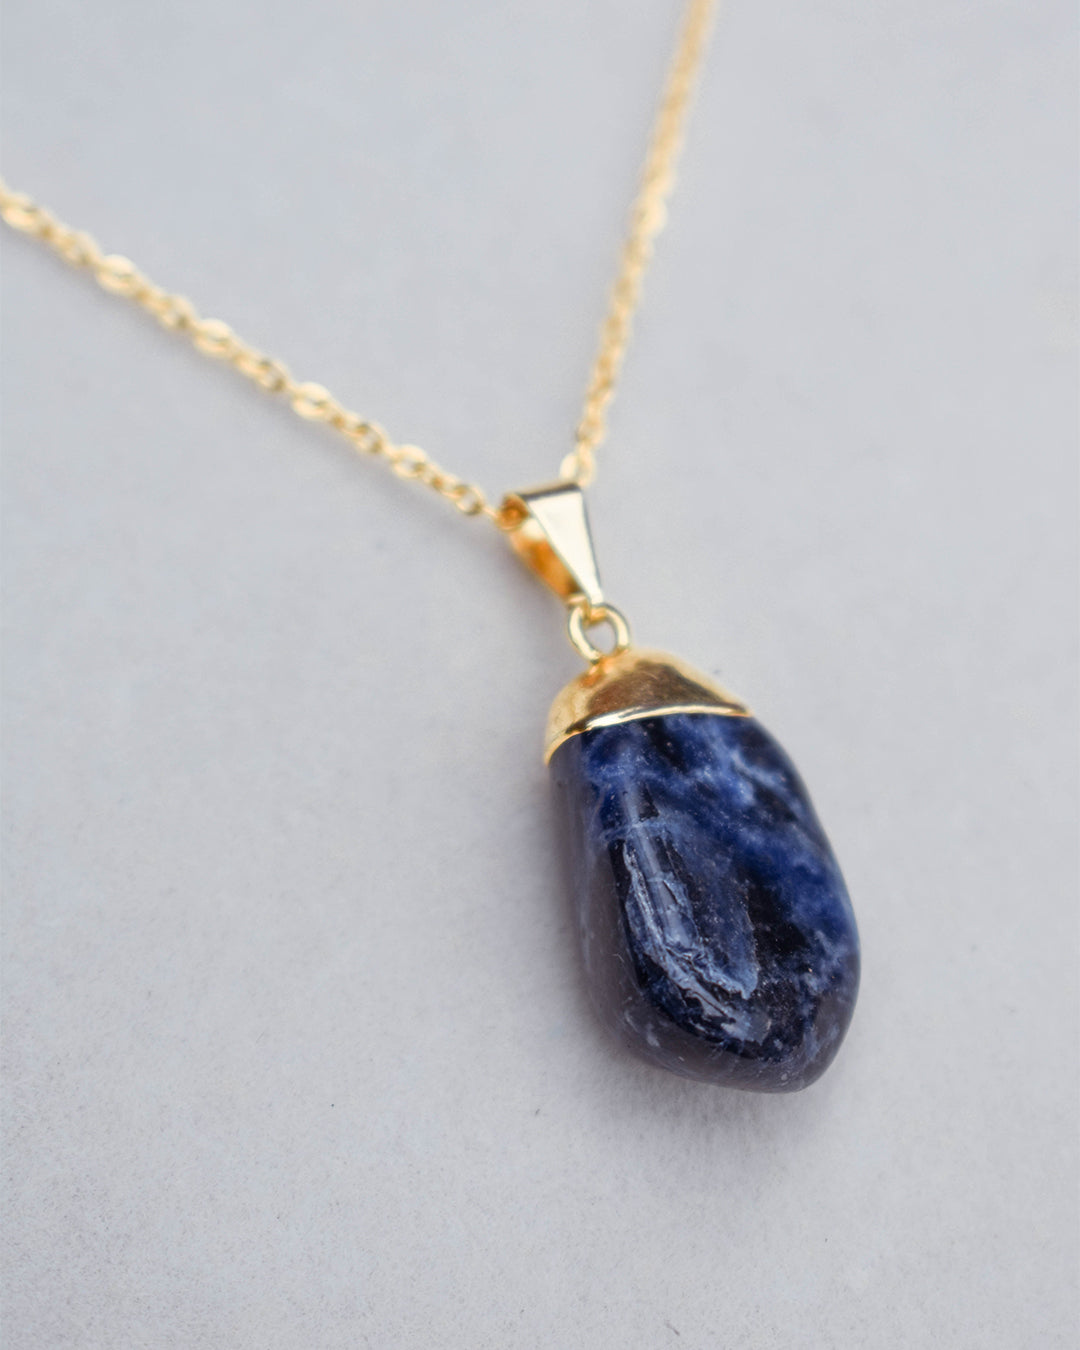 Gold Plated chain with Sodalite crystal pendant